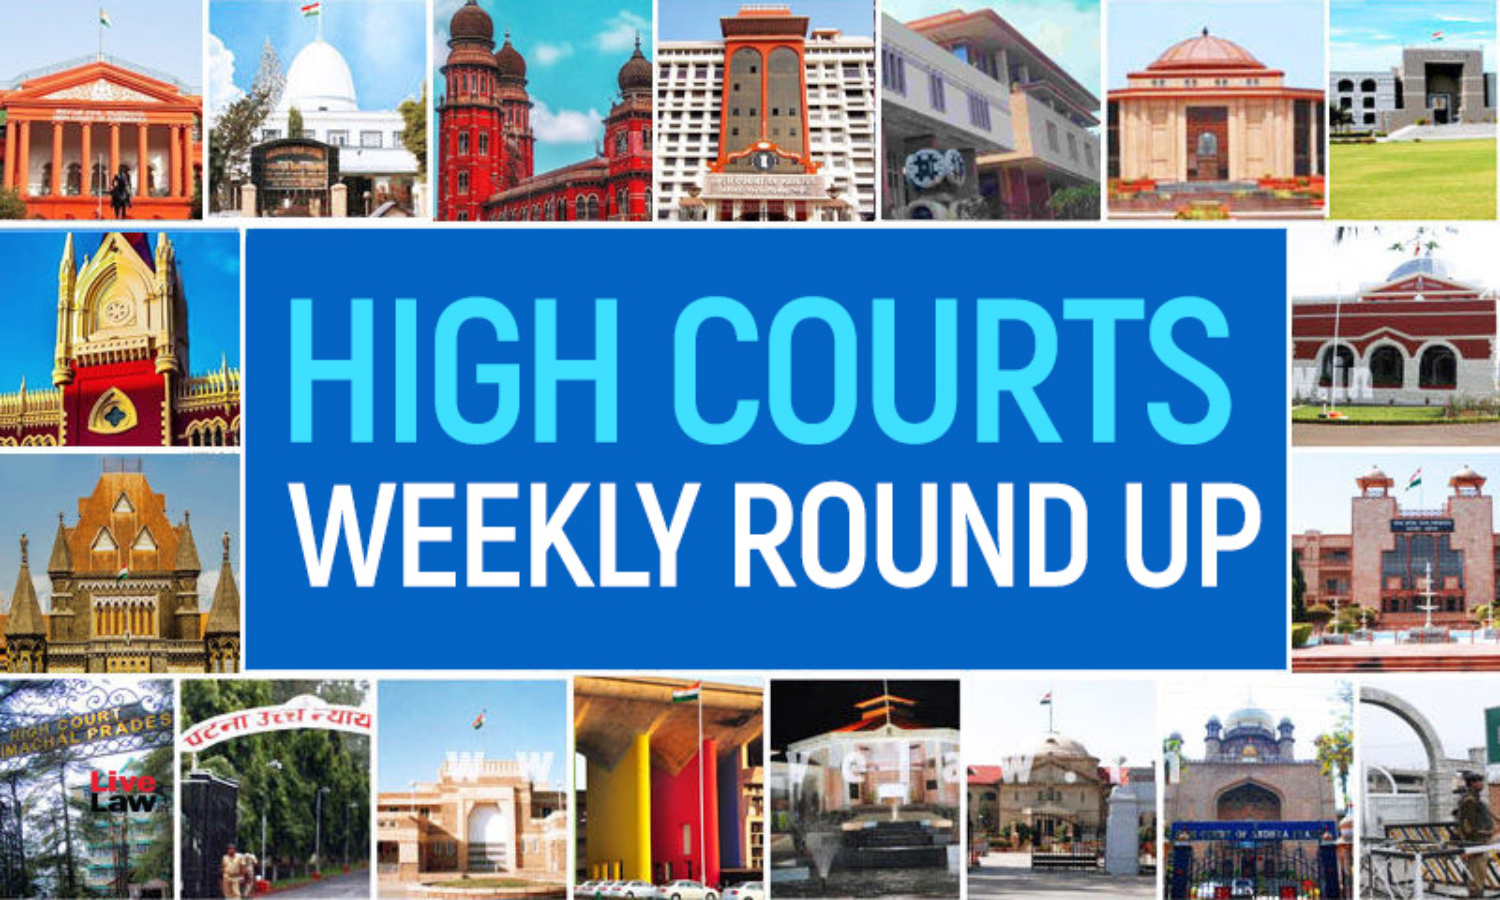 Cfnm Schoolgirl Cumshot - All High Courts Weekly Round Up [18 July 2022 - 24 July 2022]